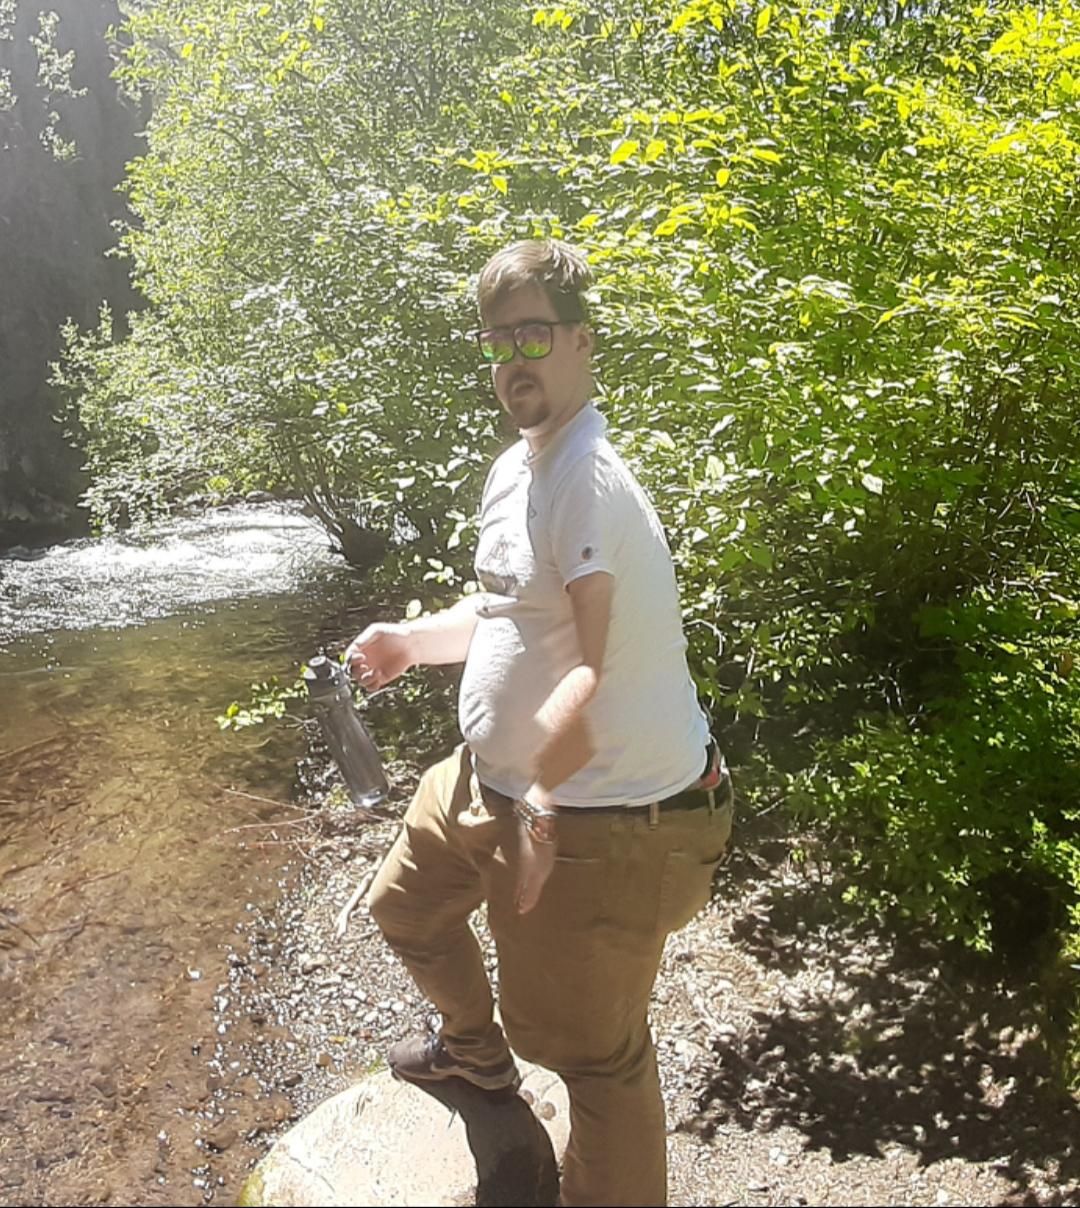 Tried to take a panorama from our hike today, it really did my boyfriend dirty...